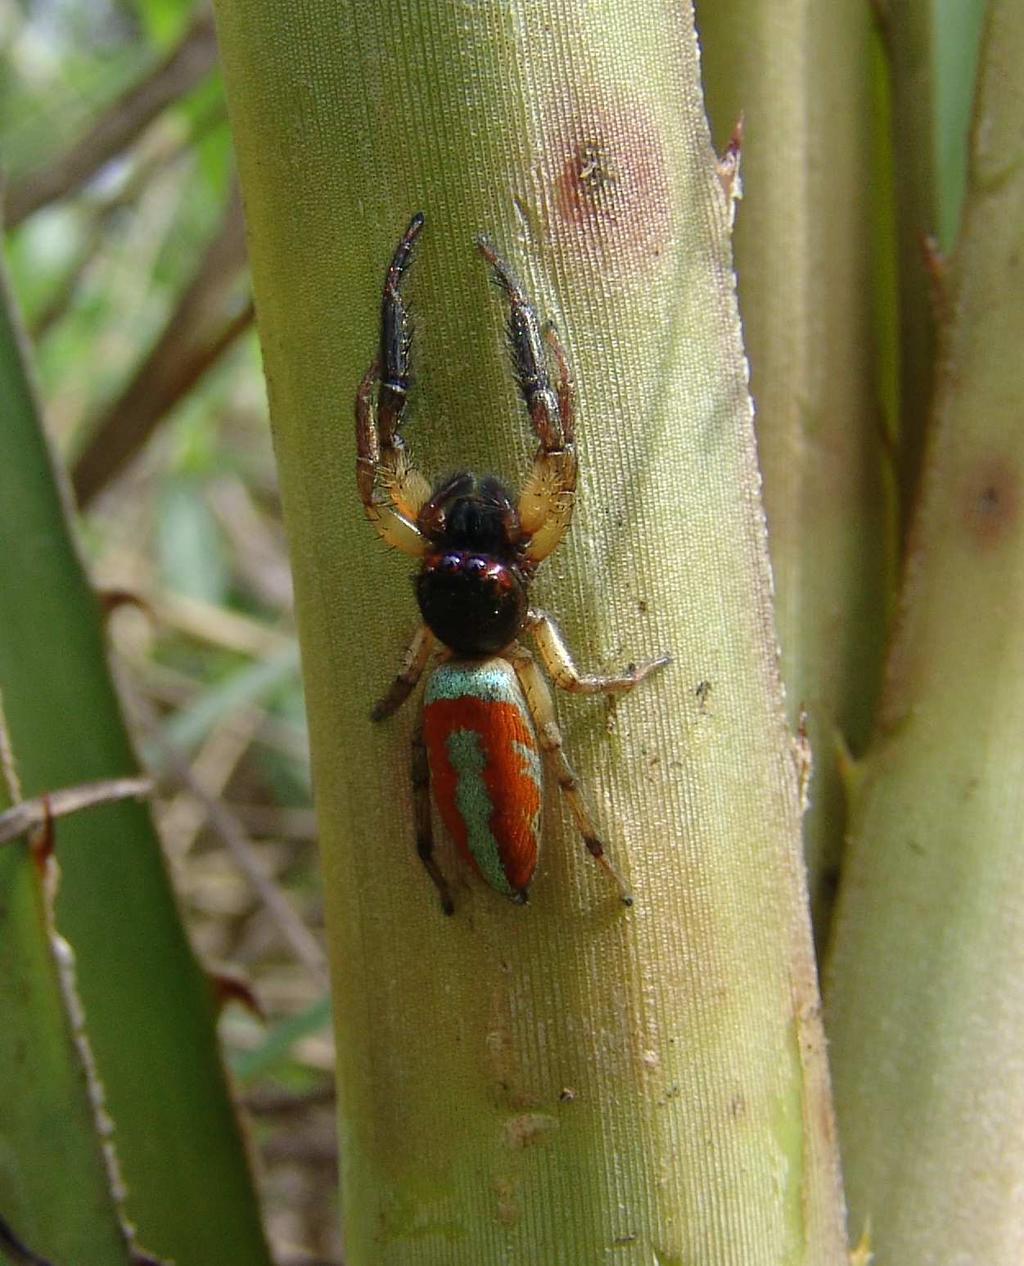 While many types of beetles attack the body of bromeliads in Central and South America, none seem to have become established in cultivation here.